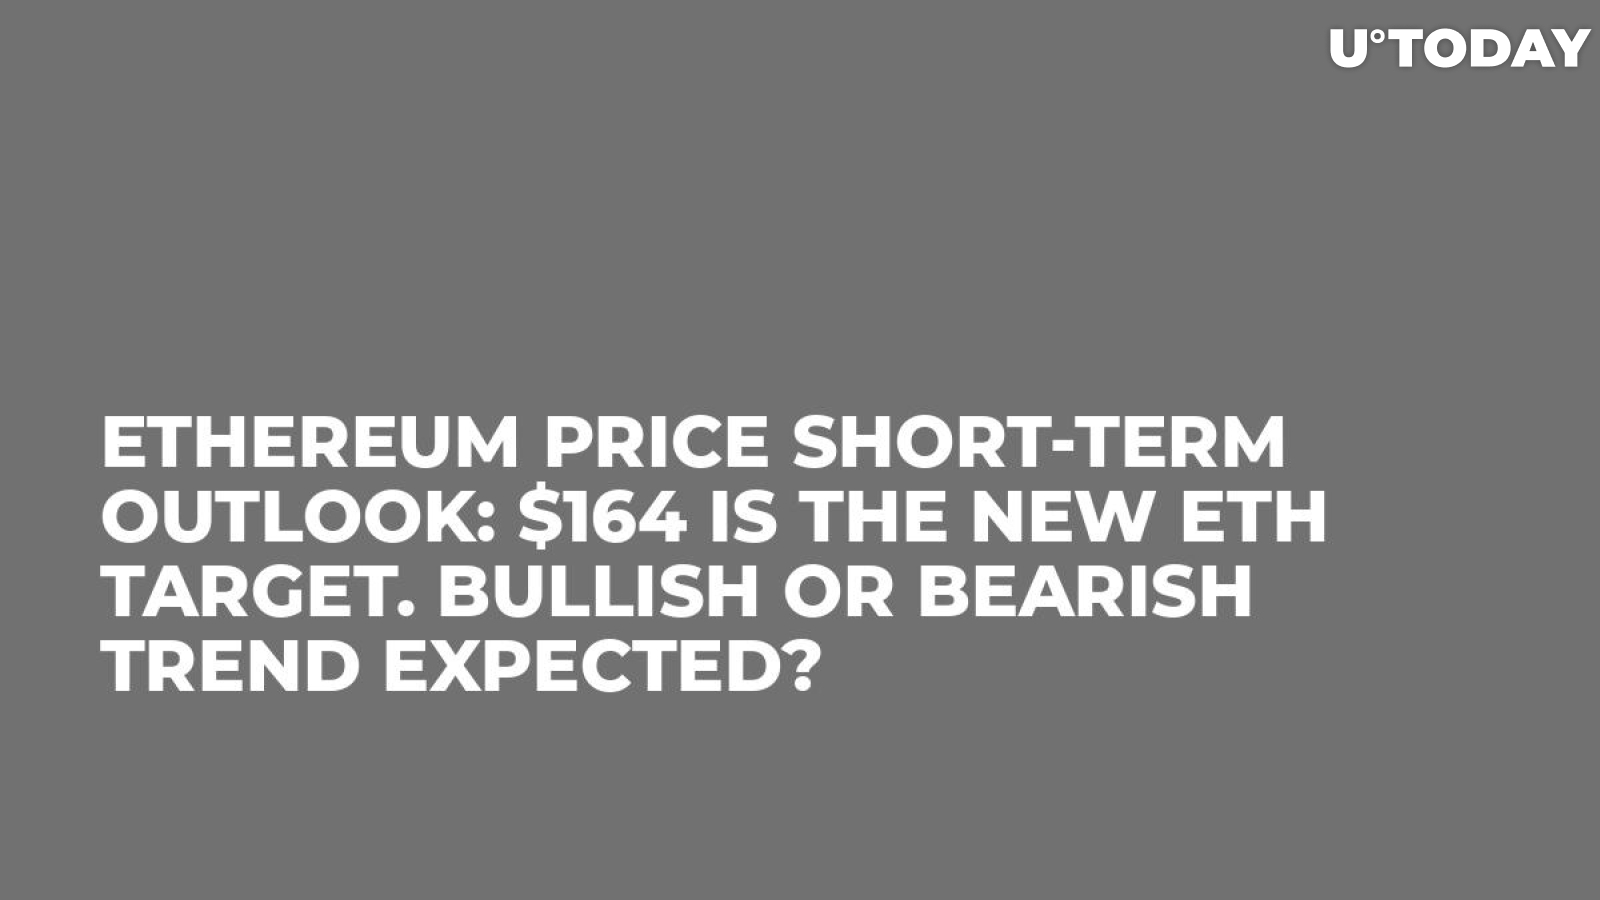 Ethereum Price Short-Term Outlook: $164 Is The New ETH Target. Bullish or Bearish Trend Expected?